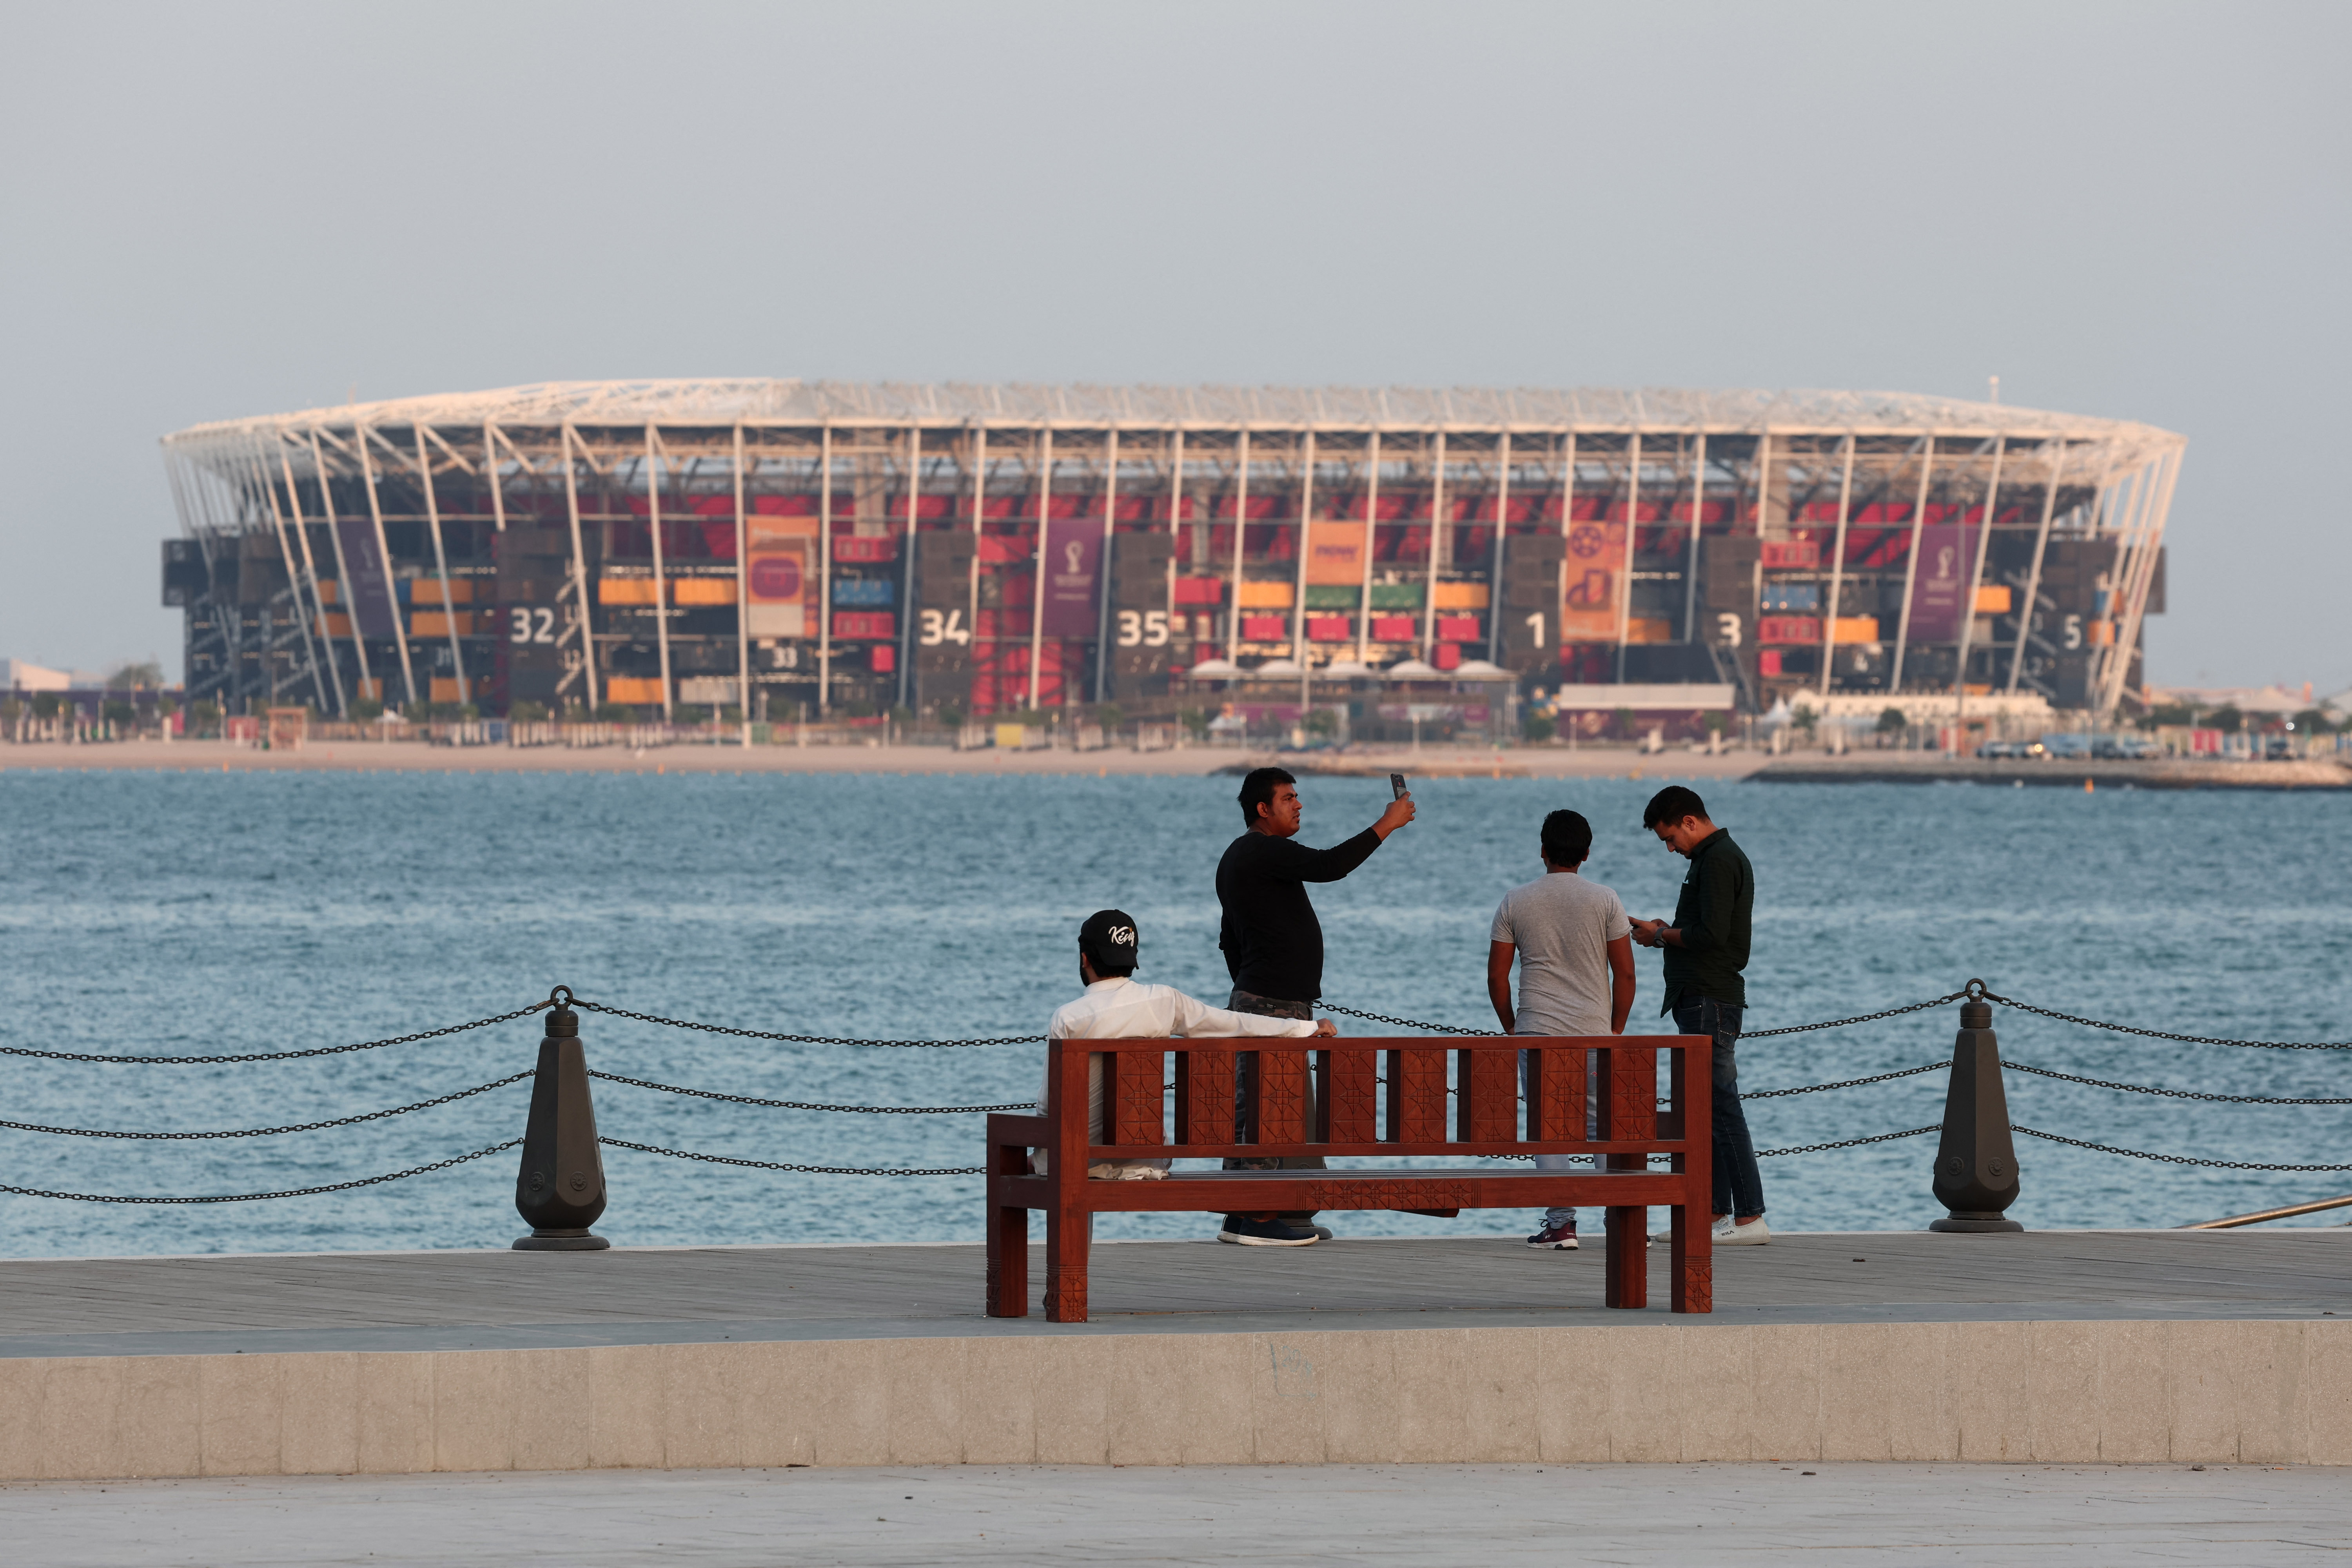 Soccer Football - FIFA World Cup Qatar 2022 Preview - Doha, Qatar - November 14, 2022 A man takes a selfie in front of Stadium 974 in Doha REUTERS/Marko Djurica